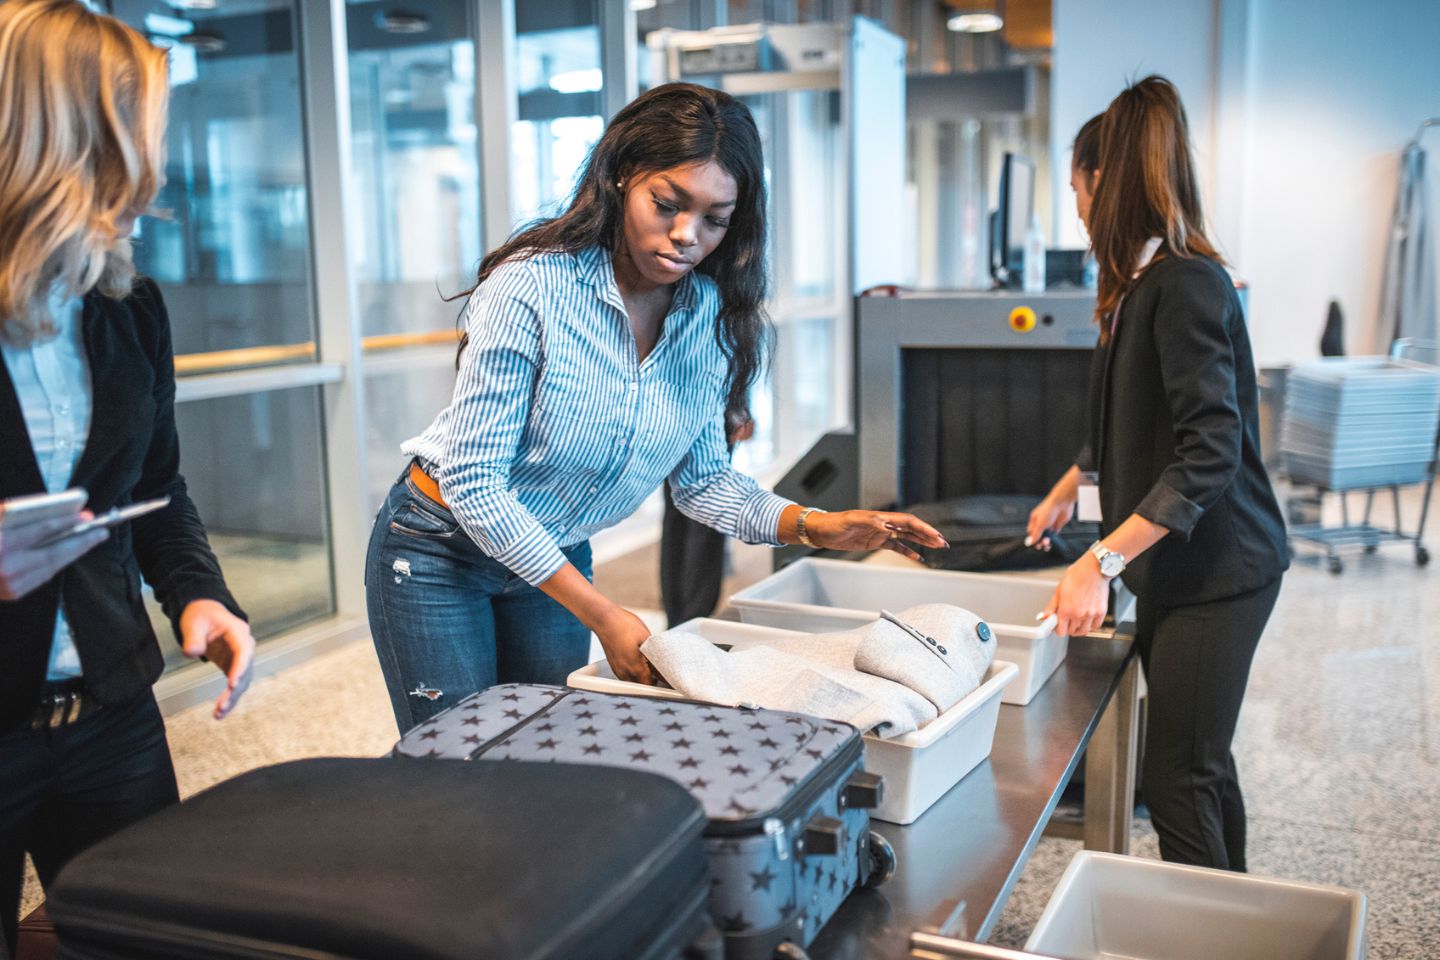 woman going through airport security screening